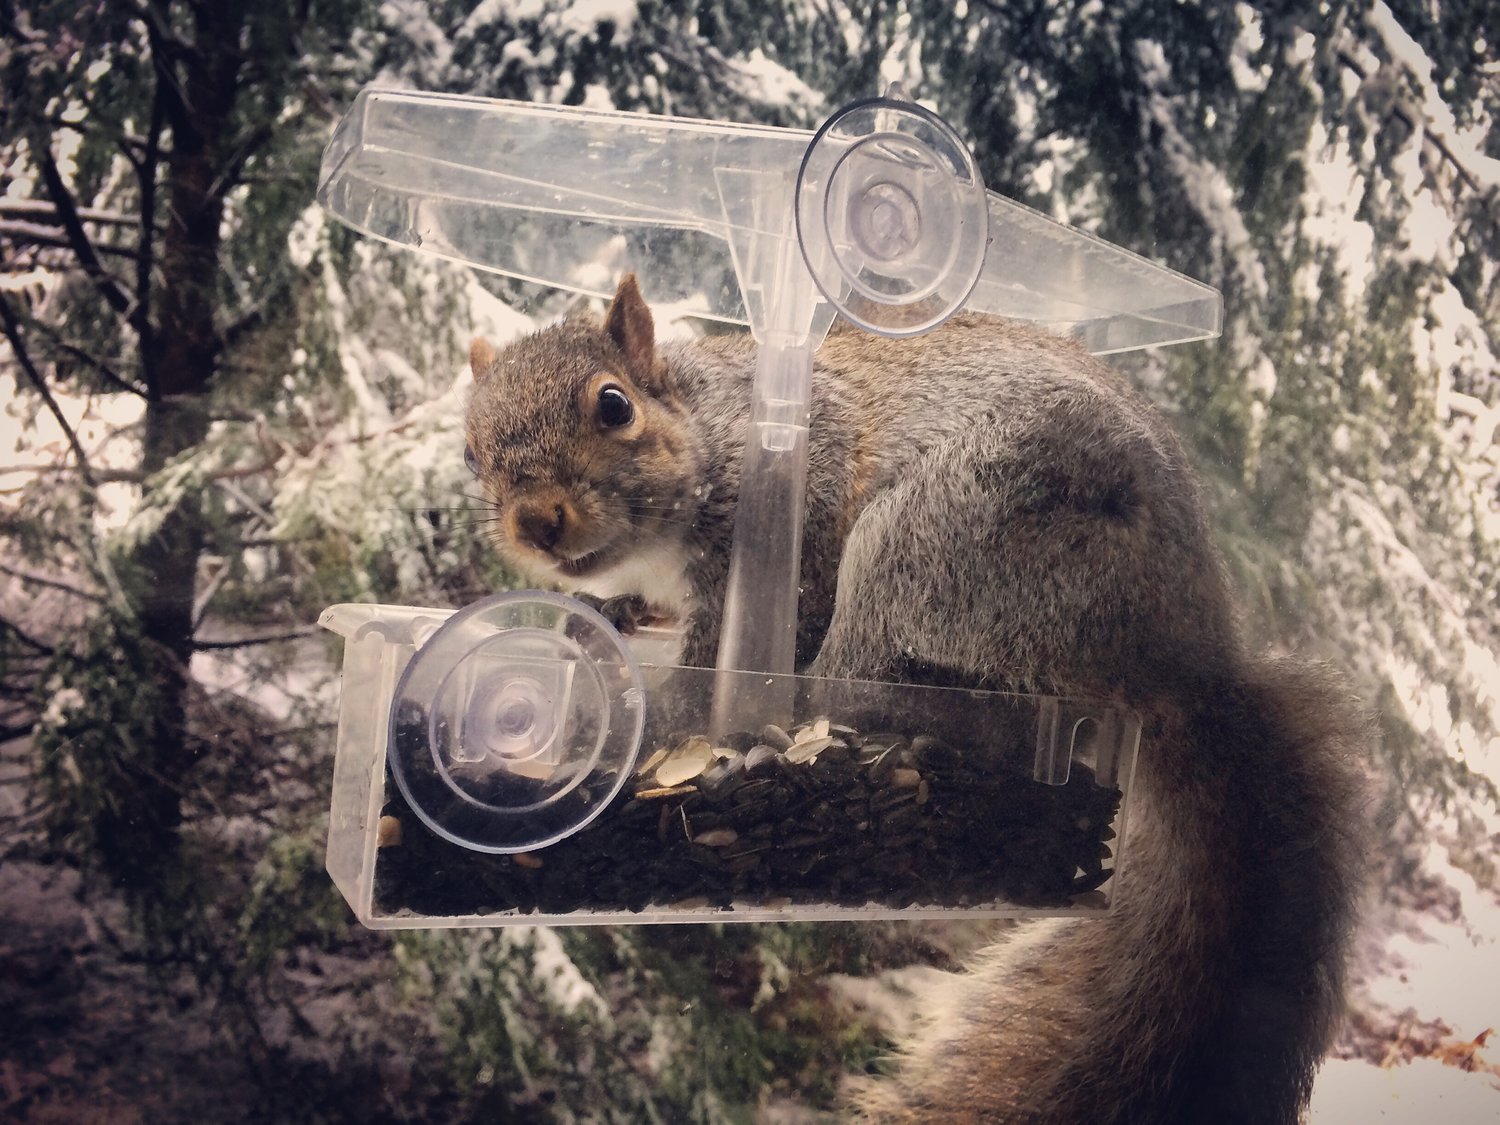 Squirrels like to spy. But you can spy back. Enjoy the entertainment! Take a picture or video and share it with the world. Make your favorite rodent a social media sensation.